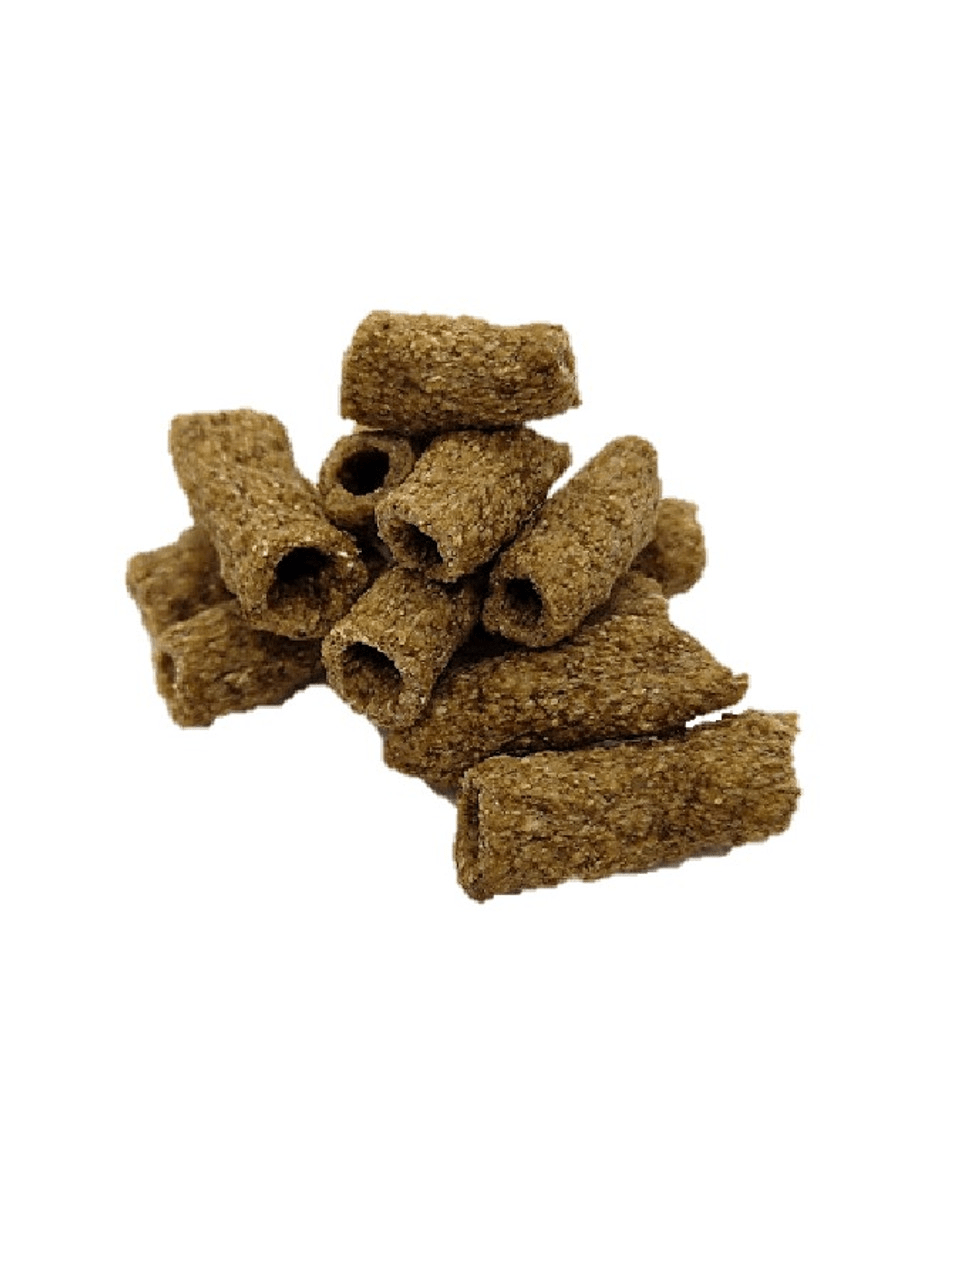 Huds and Toke Stable & Tack Room Accessories 1kg / Molasses Huds and Toke Mollasses Horse Bix 1kg